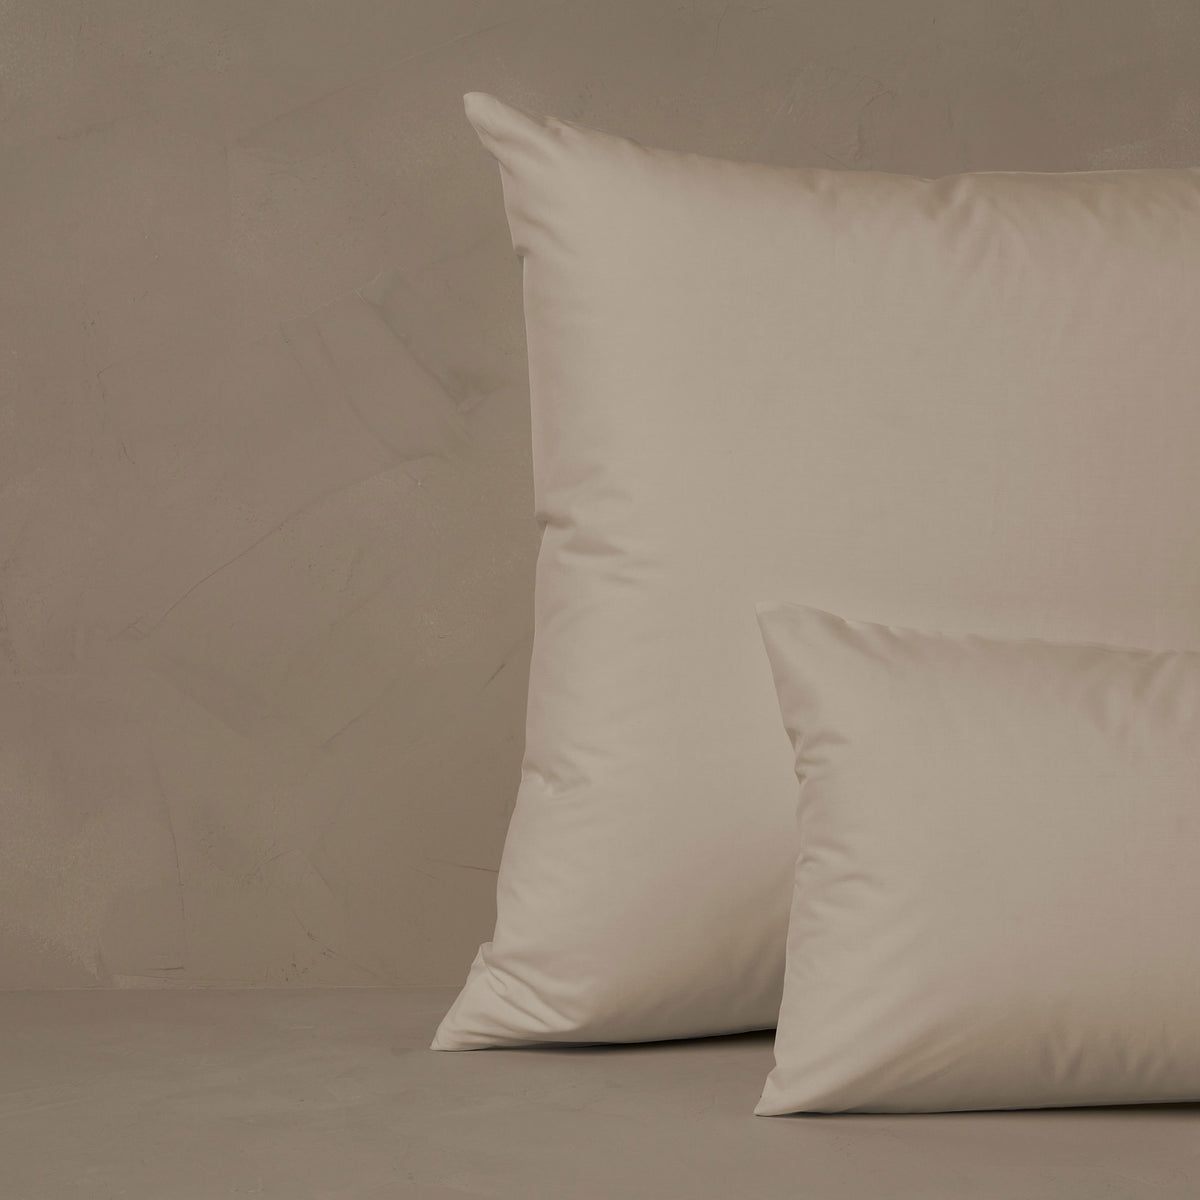 An image of a small boudoir or travel size pillow stacked in front of a large euro size pillow. The pillow cases are made in Italy of LETTO Americano Cotton Percale in color ivory, a crisp and cool American grown Supima cotton. data-image-id=